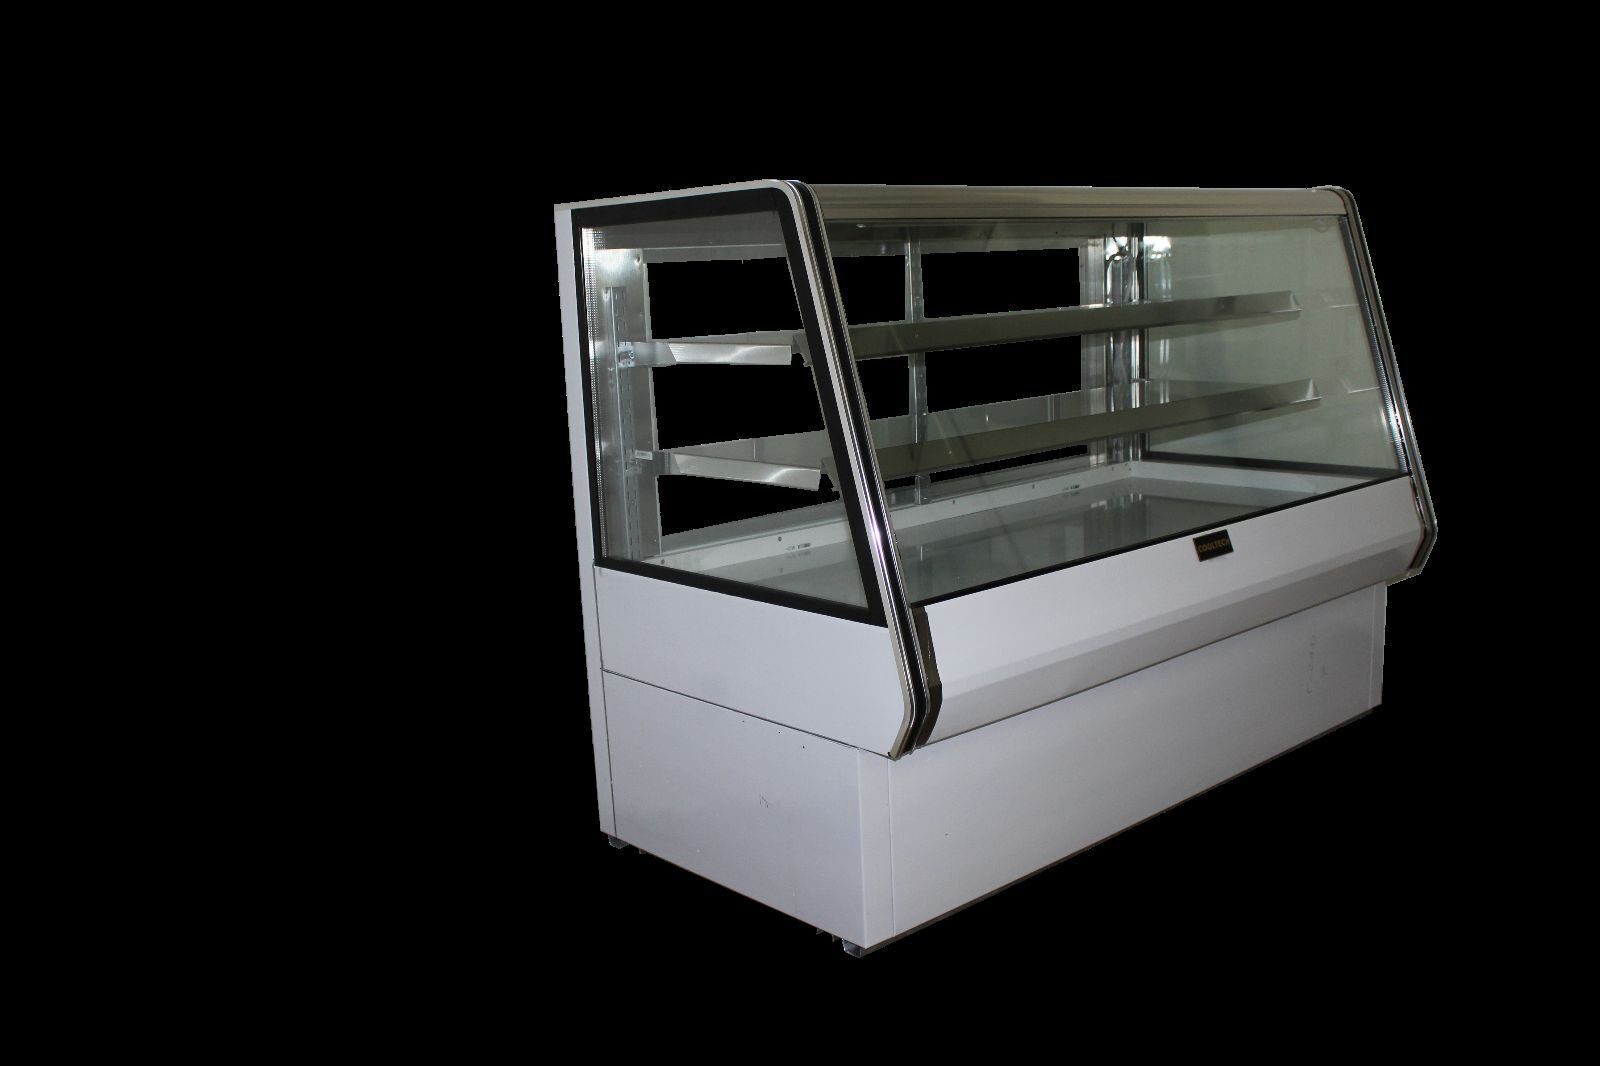 Empty Cooltech Dry Counter Bakery Pastry Display Case 72” with glass front and multiple shelves, isolated on a black background.